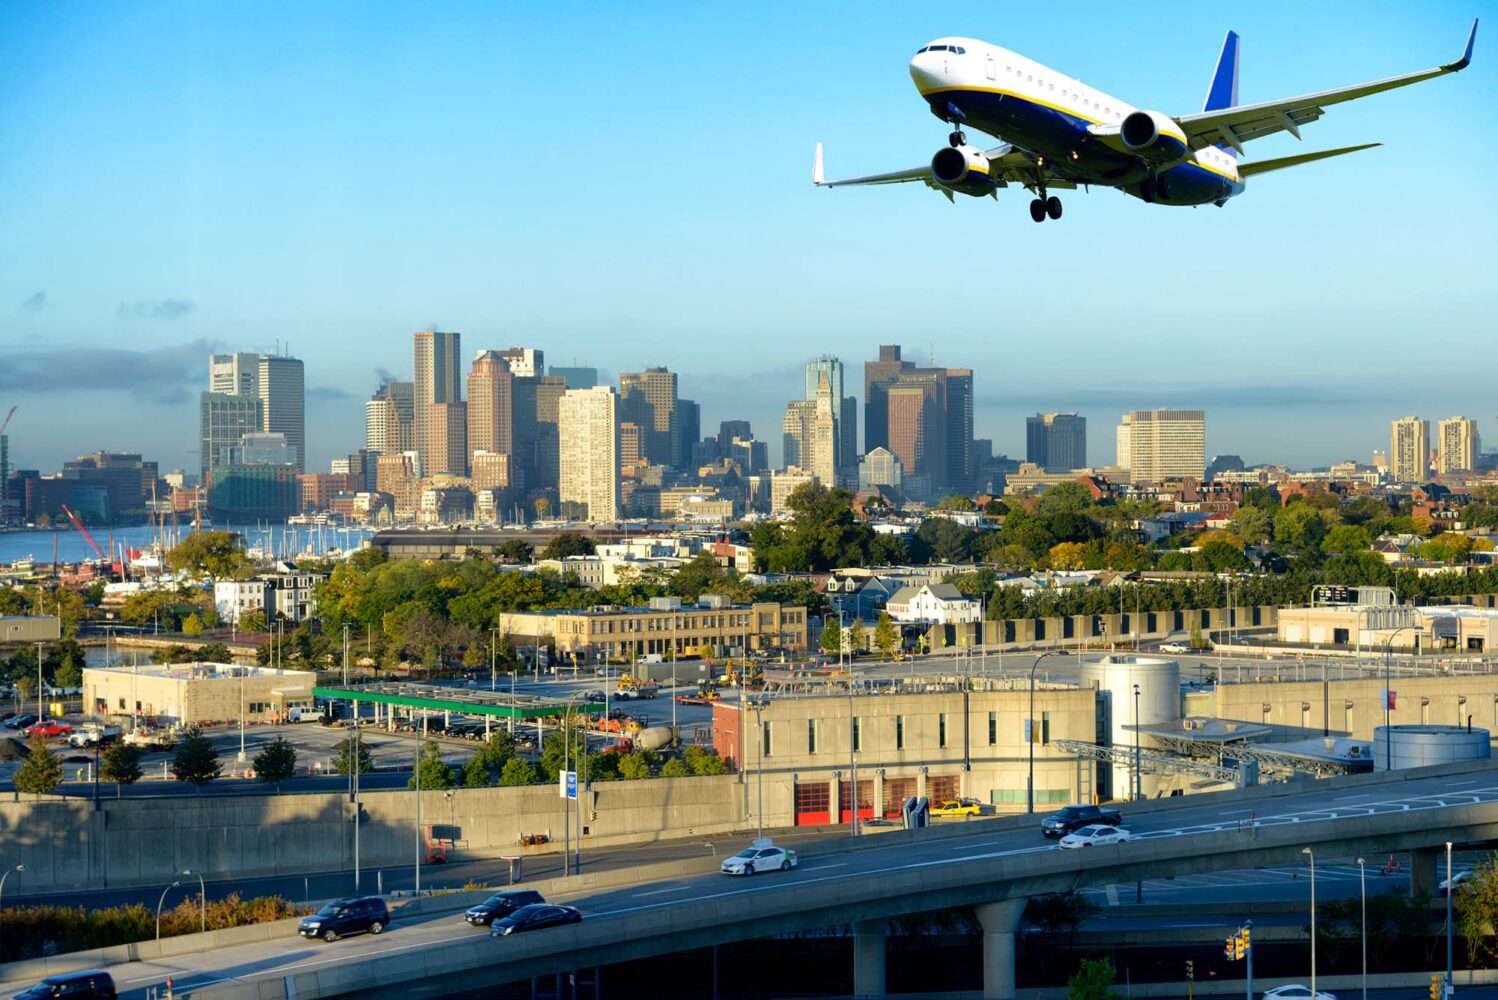 Photo: A picture of a plane flying away from a city landscape